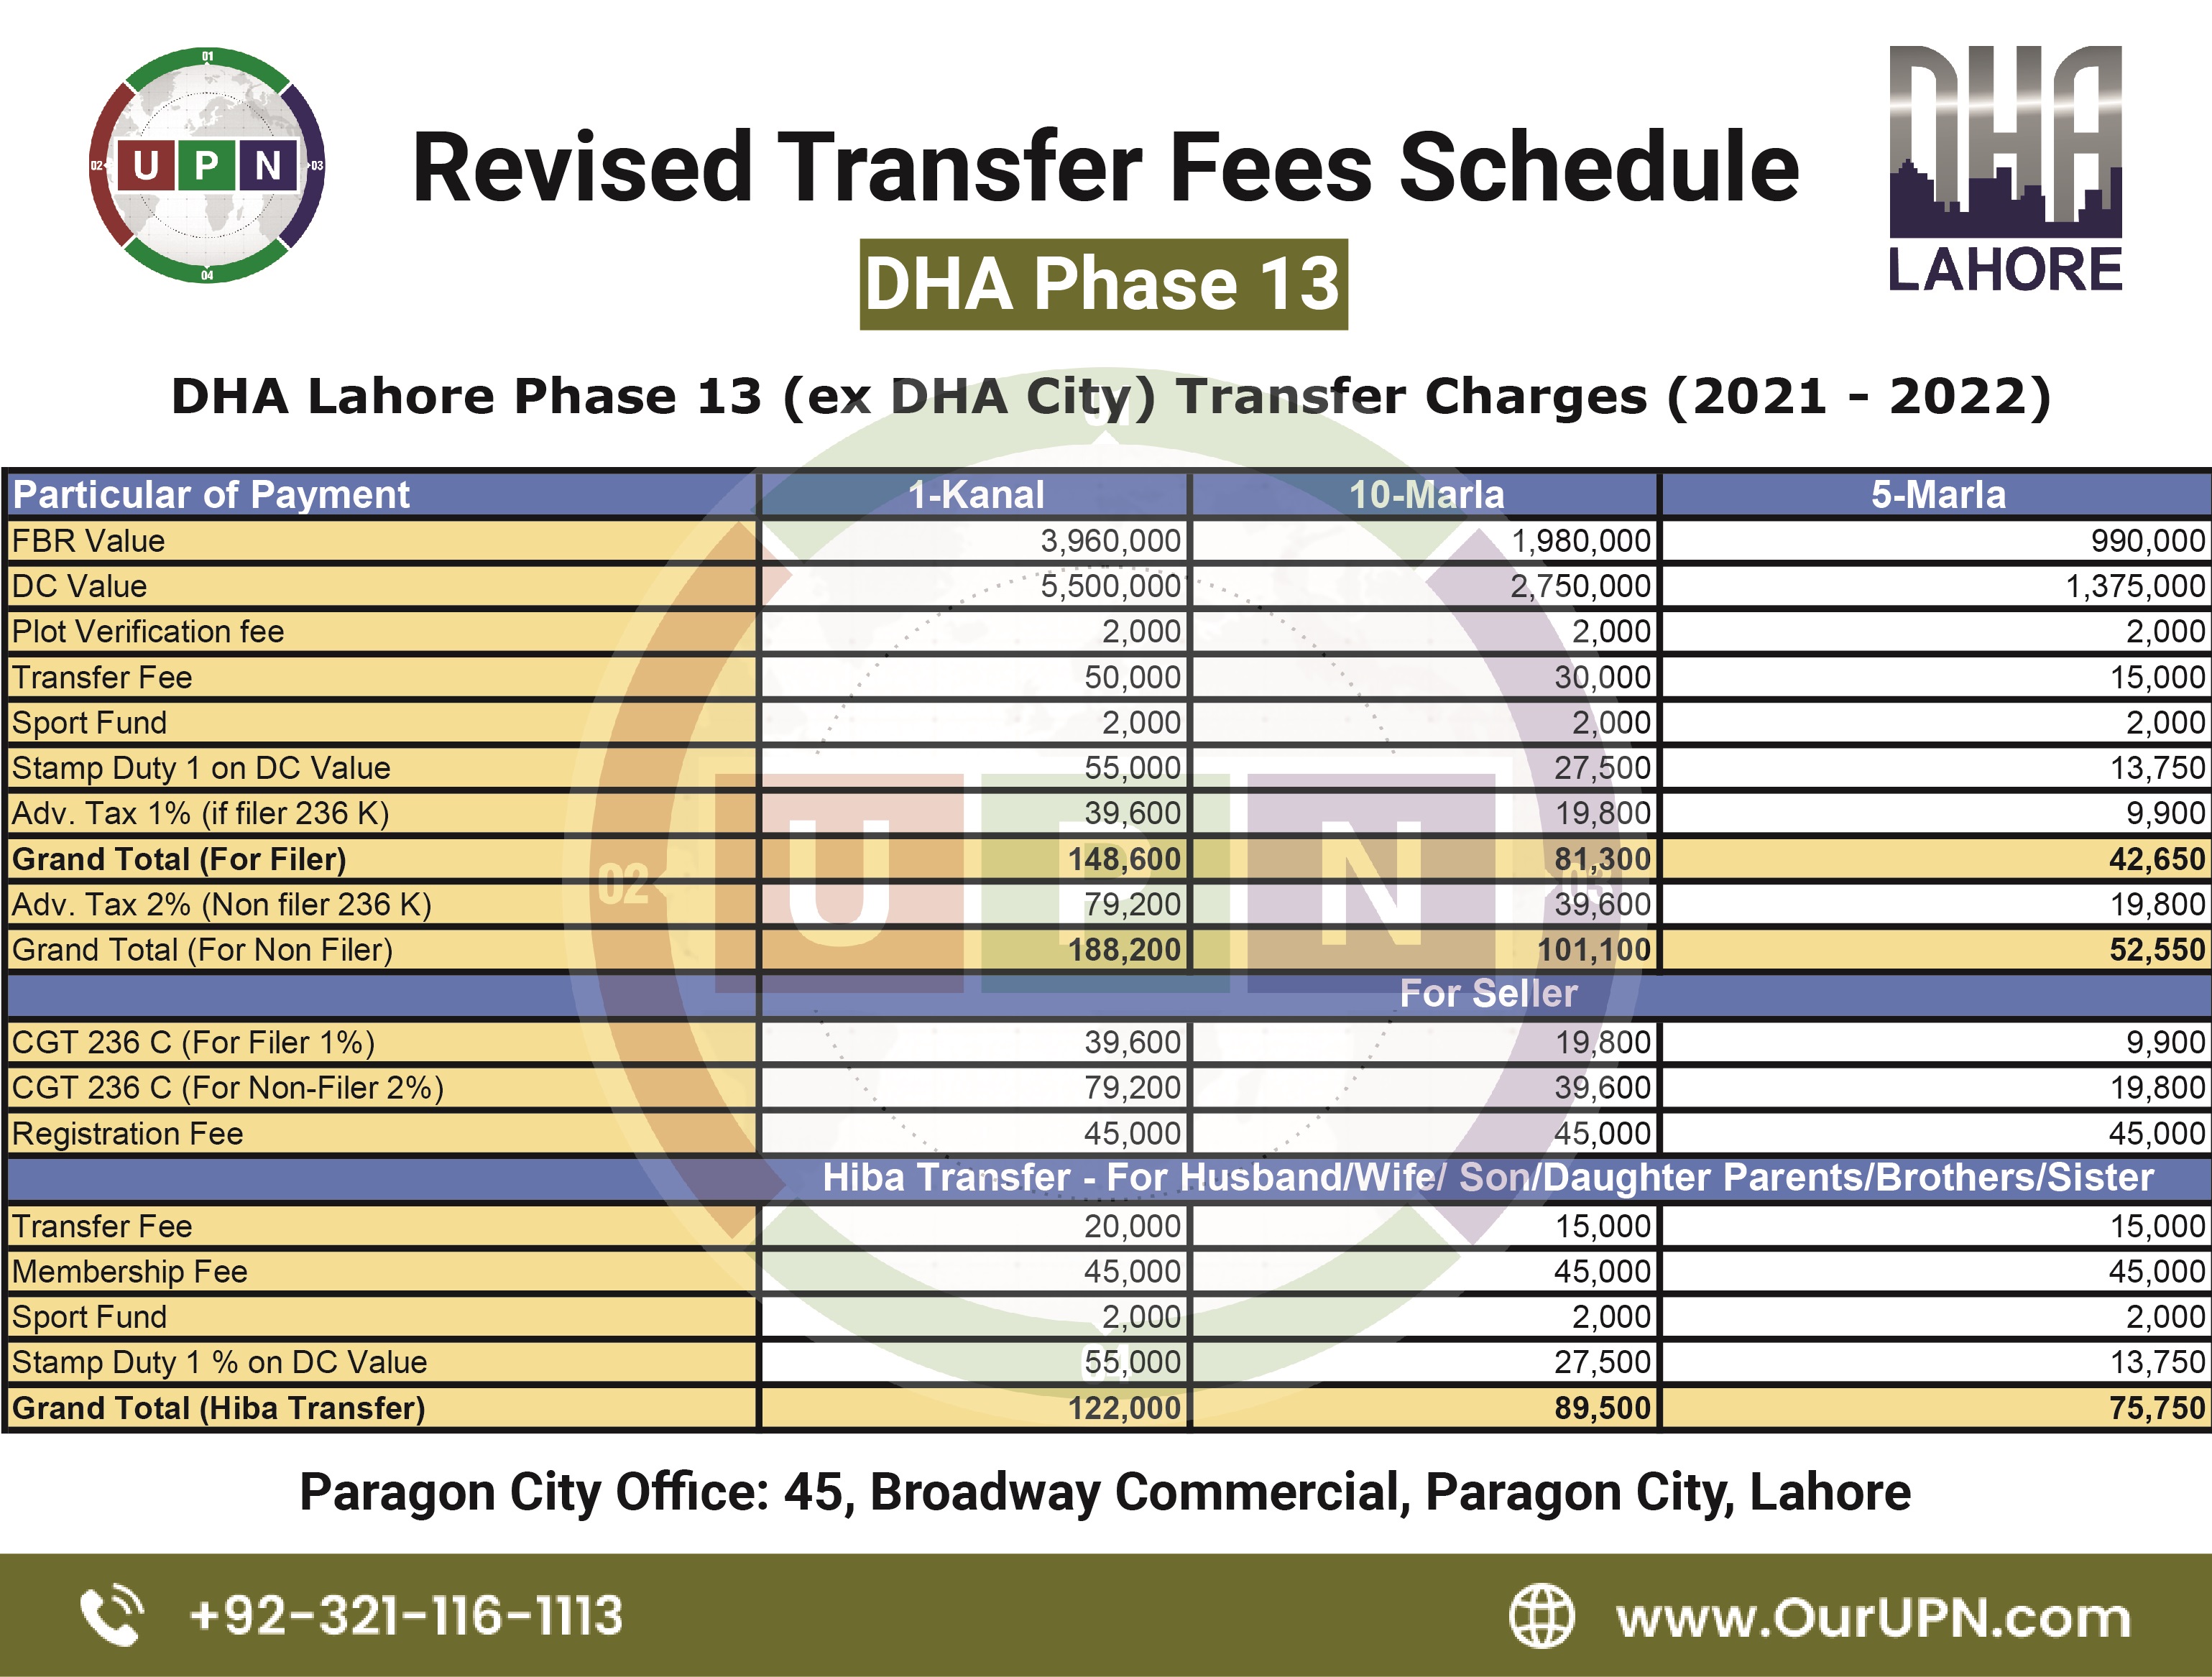 DHA Phase 13 Transfer Fees Schedule 2021-2022